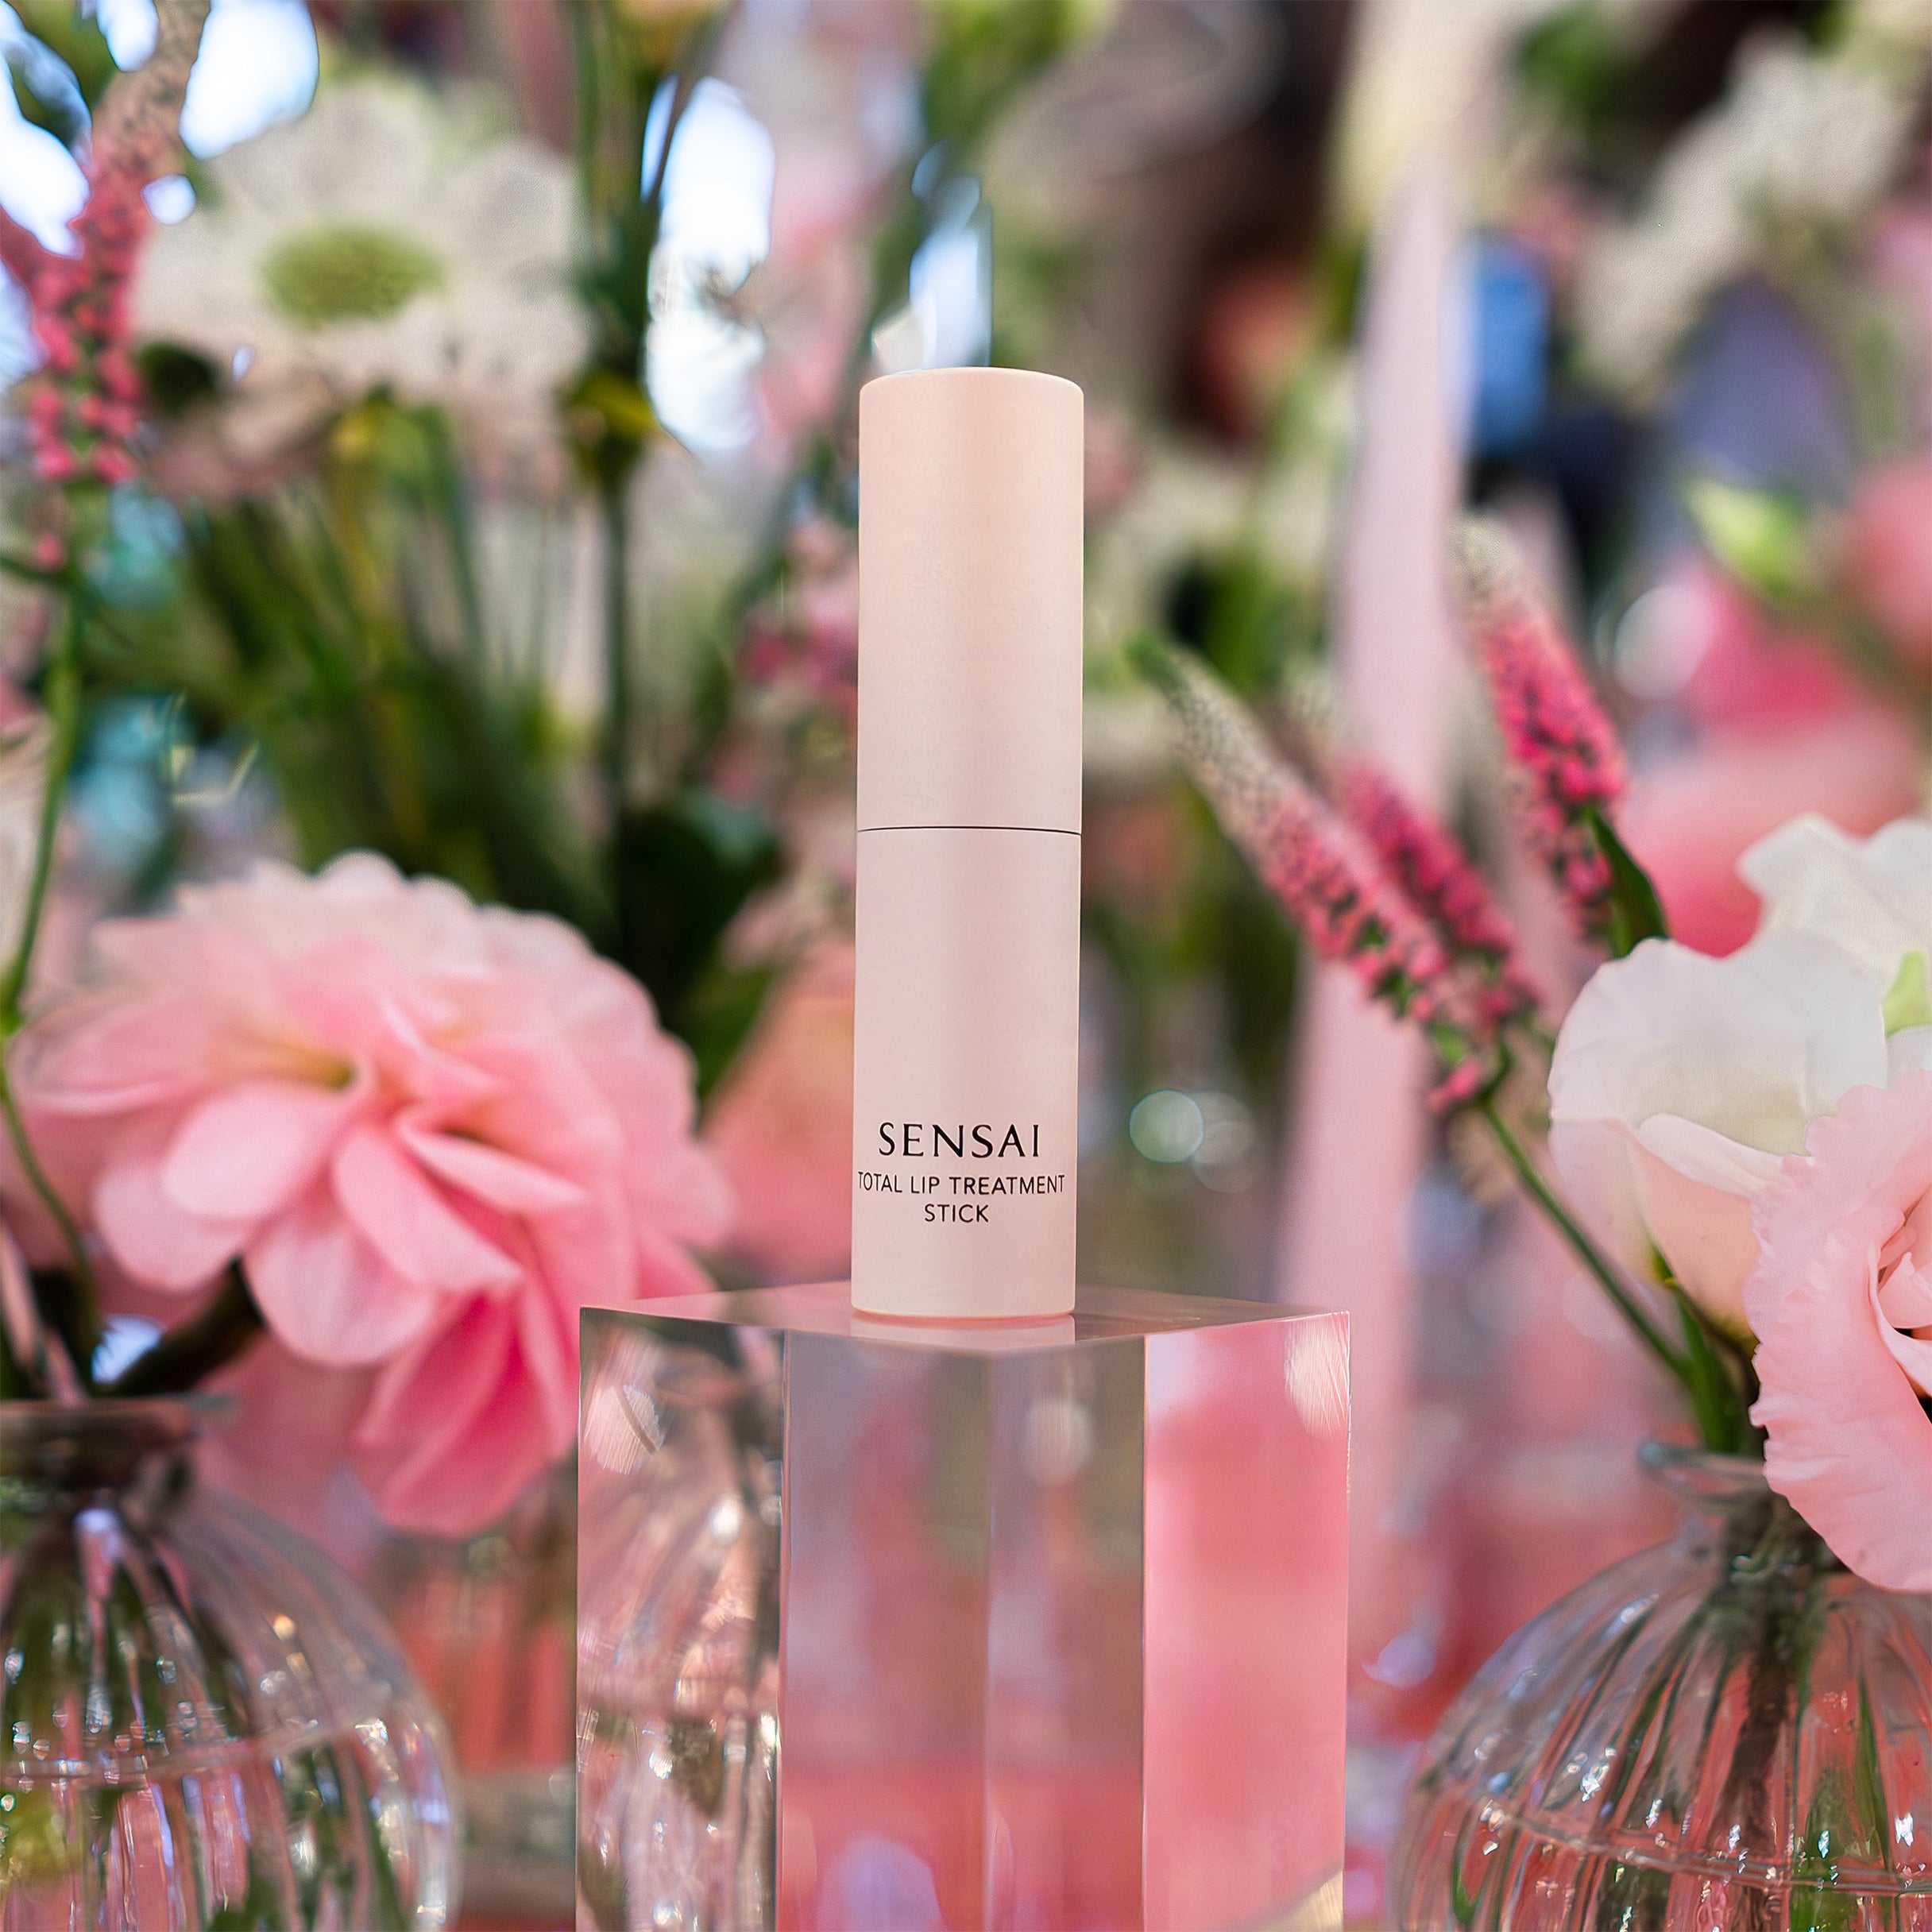 Sensai Total Lip Treatment Stick is elegantly displayed among pink and white floral arrangements by Amarante London, adding a touch of luxury to the Sensai product launch in London.